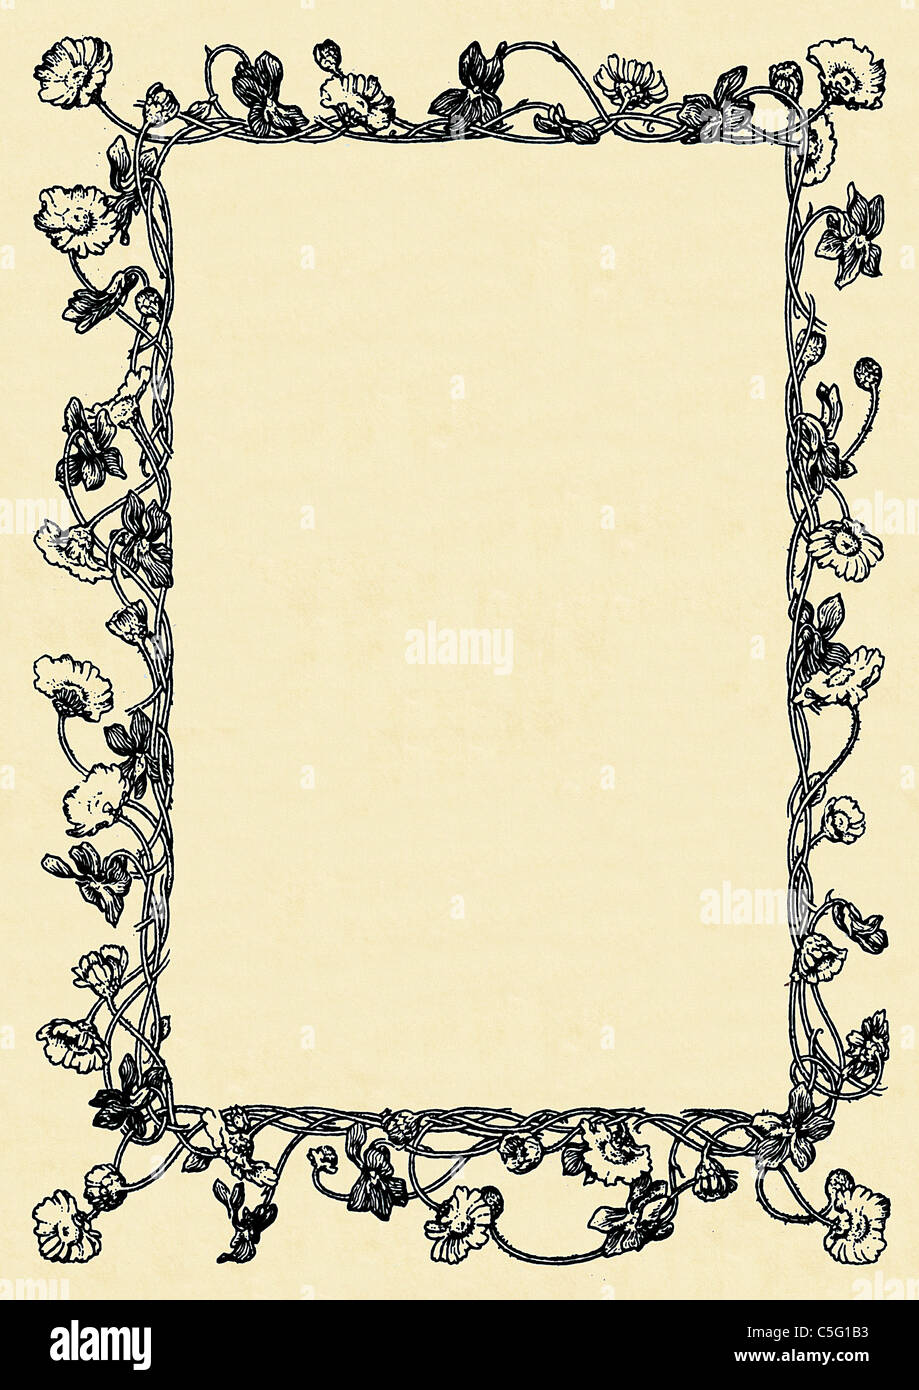 Vintage Decorative Border Design #11 from an antiquarian book illustration Stock Photo